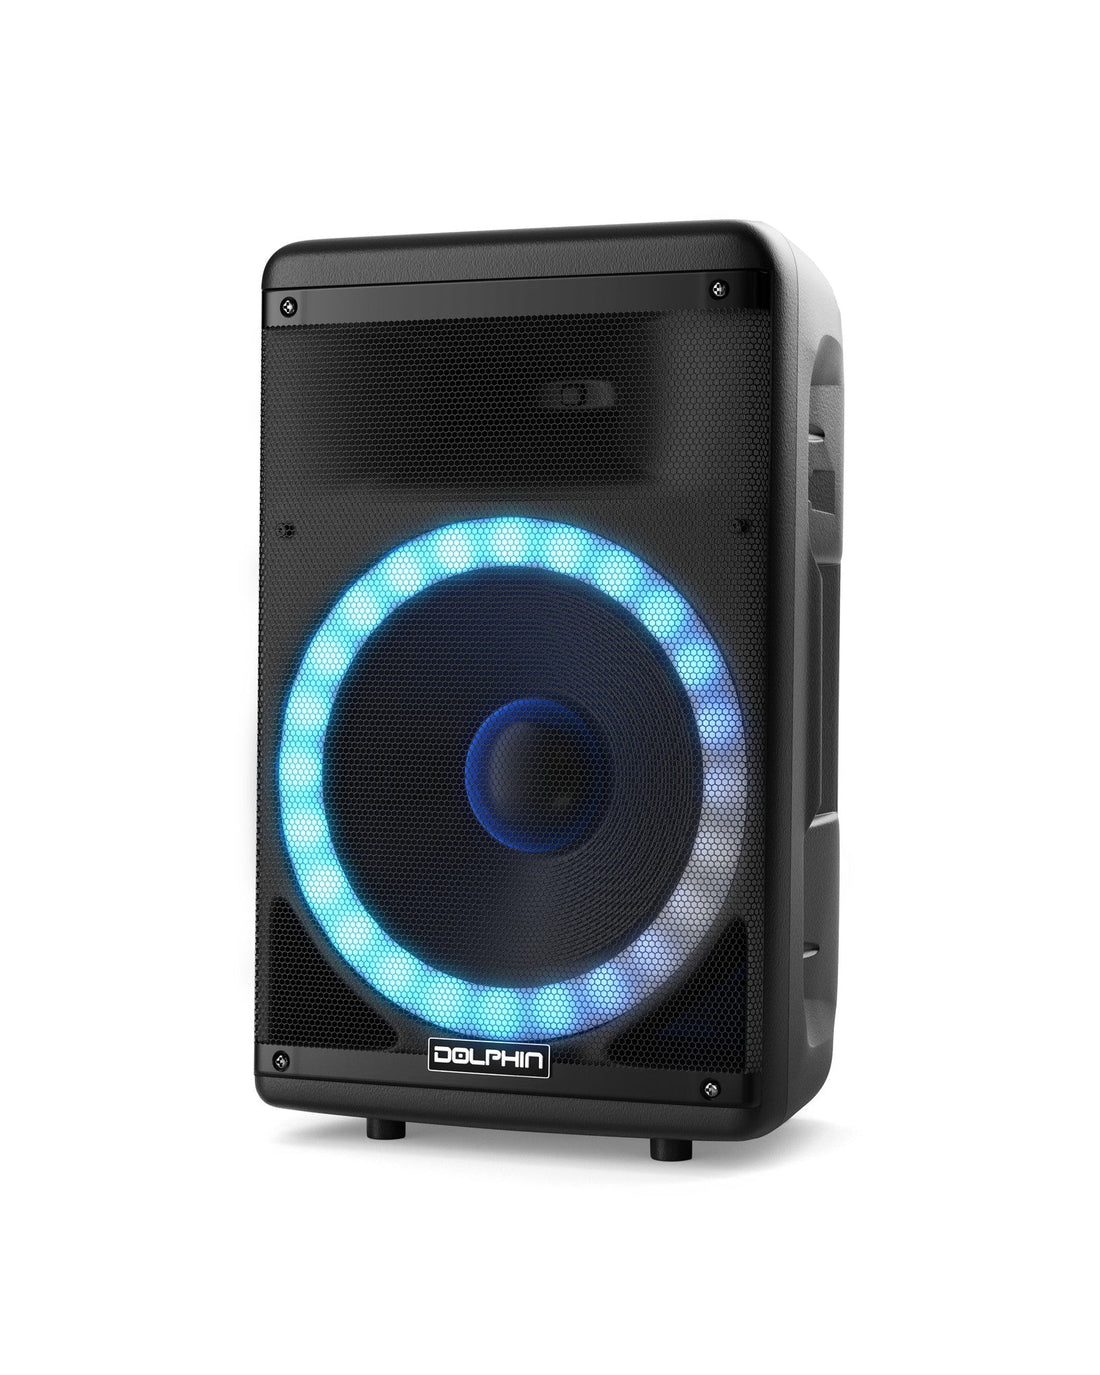 Dolphin SP-1600RBT Party Speaker | 15&quot; 3600W Loud Sound System w/LED Lights, Includes Microphone &amp; Remote Control - Top ElectrosSpeakersSP-1600RBT850006218905